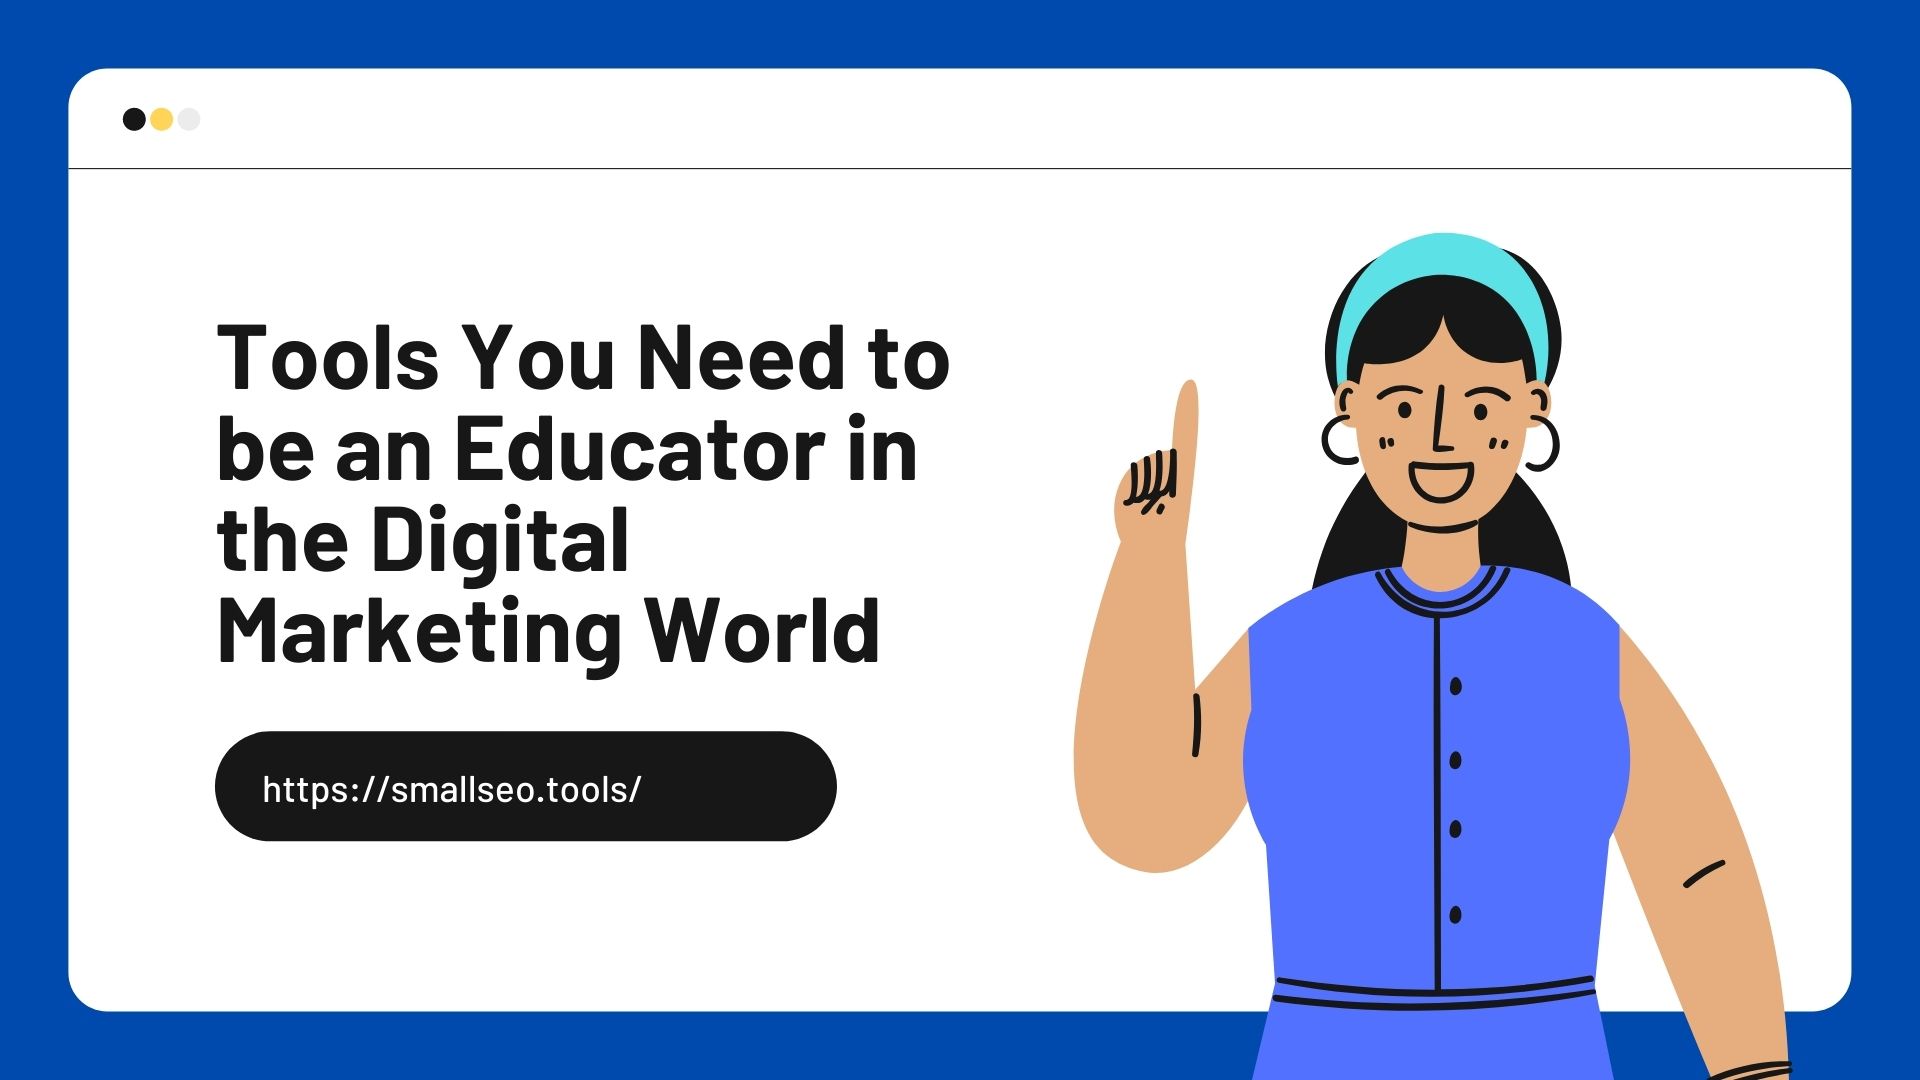 Tools You Need to be an Educator in the Digital Marketing World